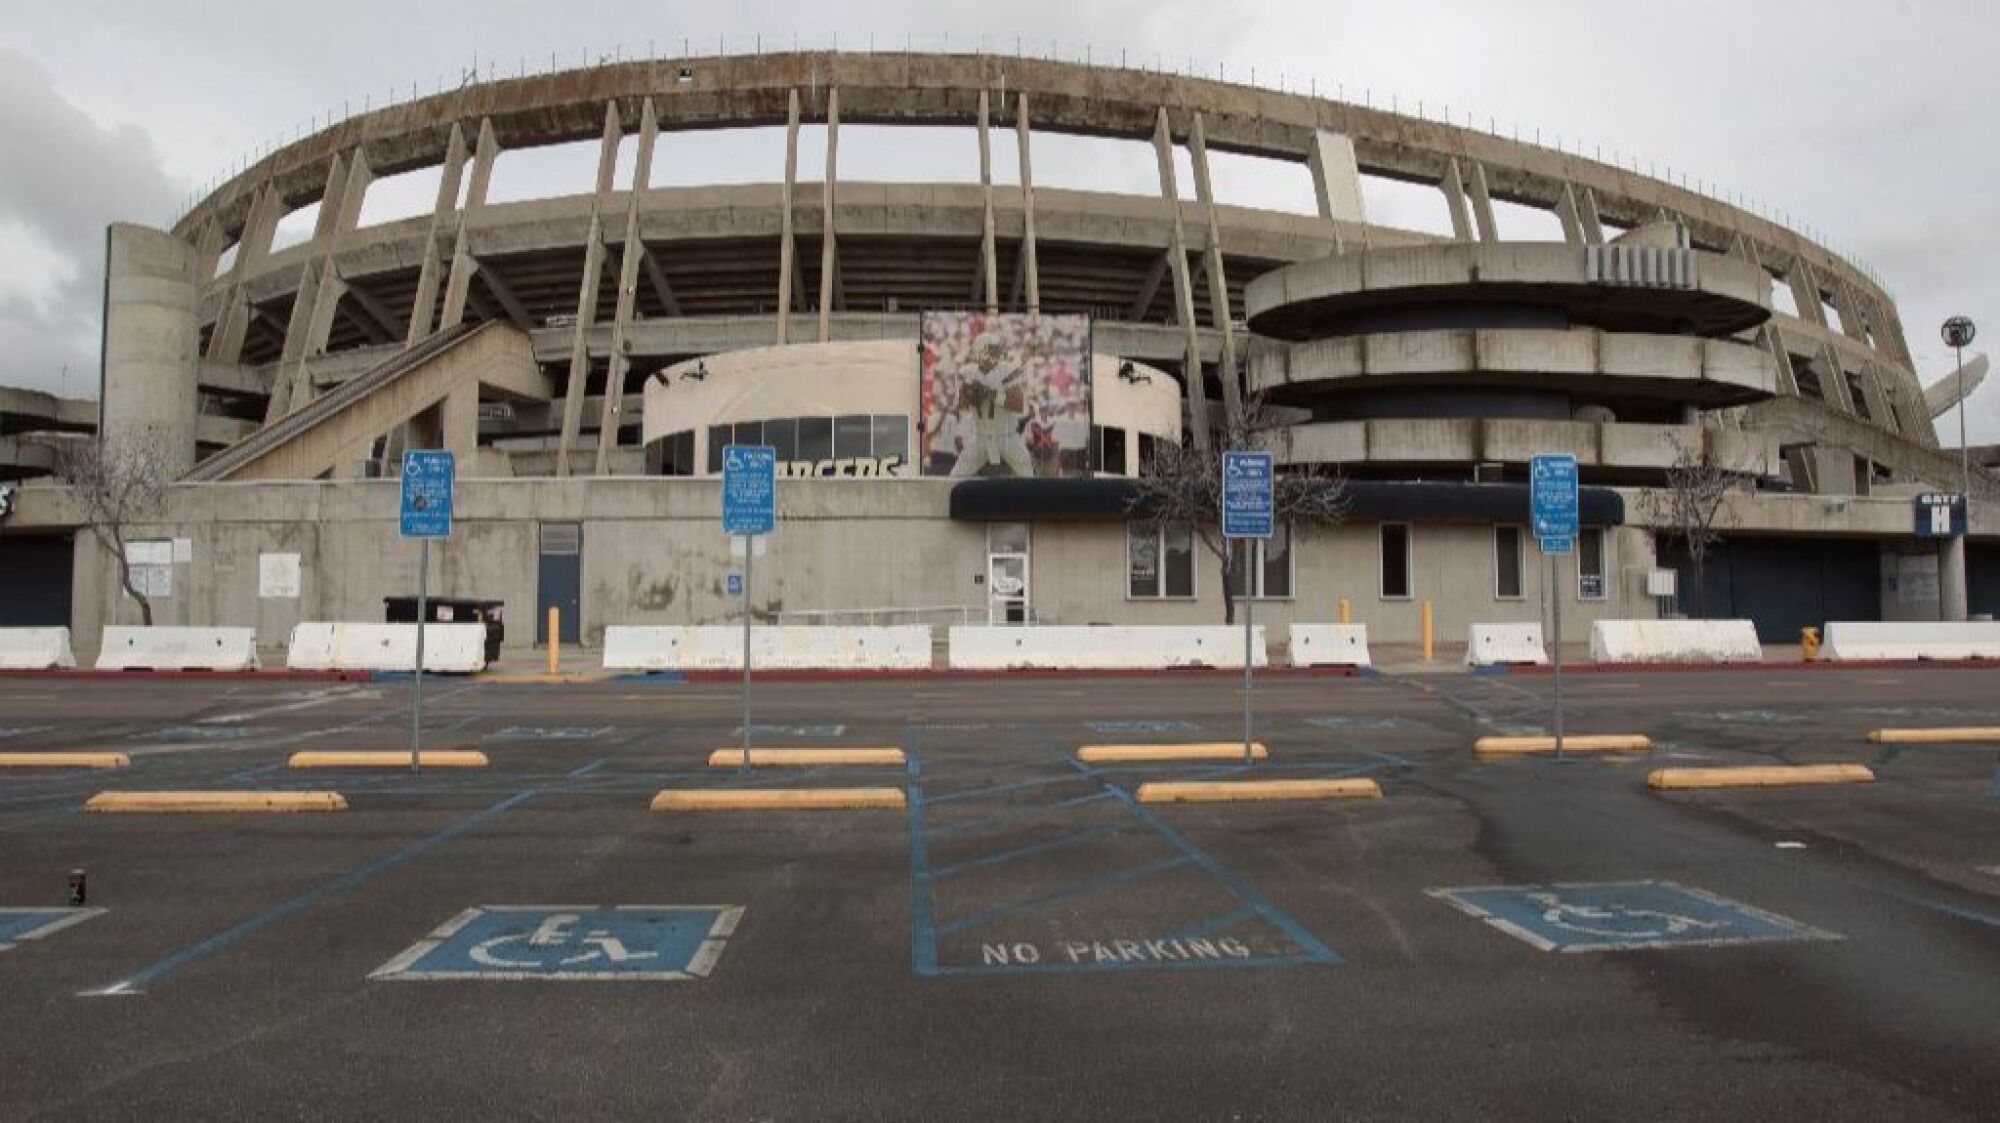 The former Chargers stadium